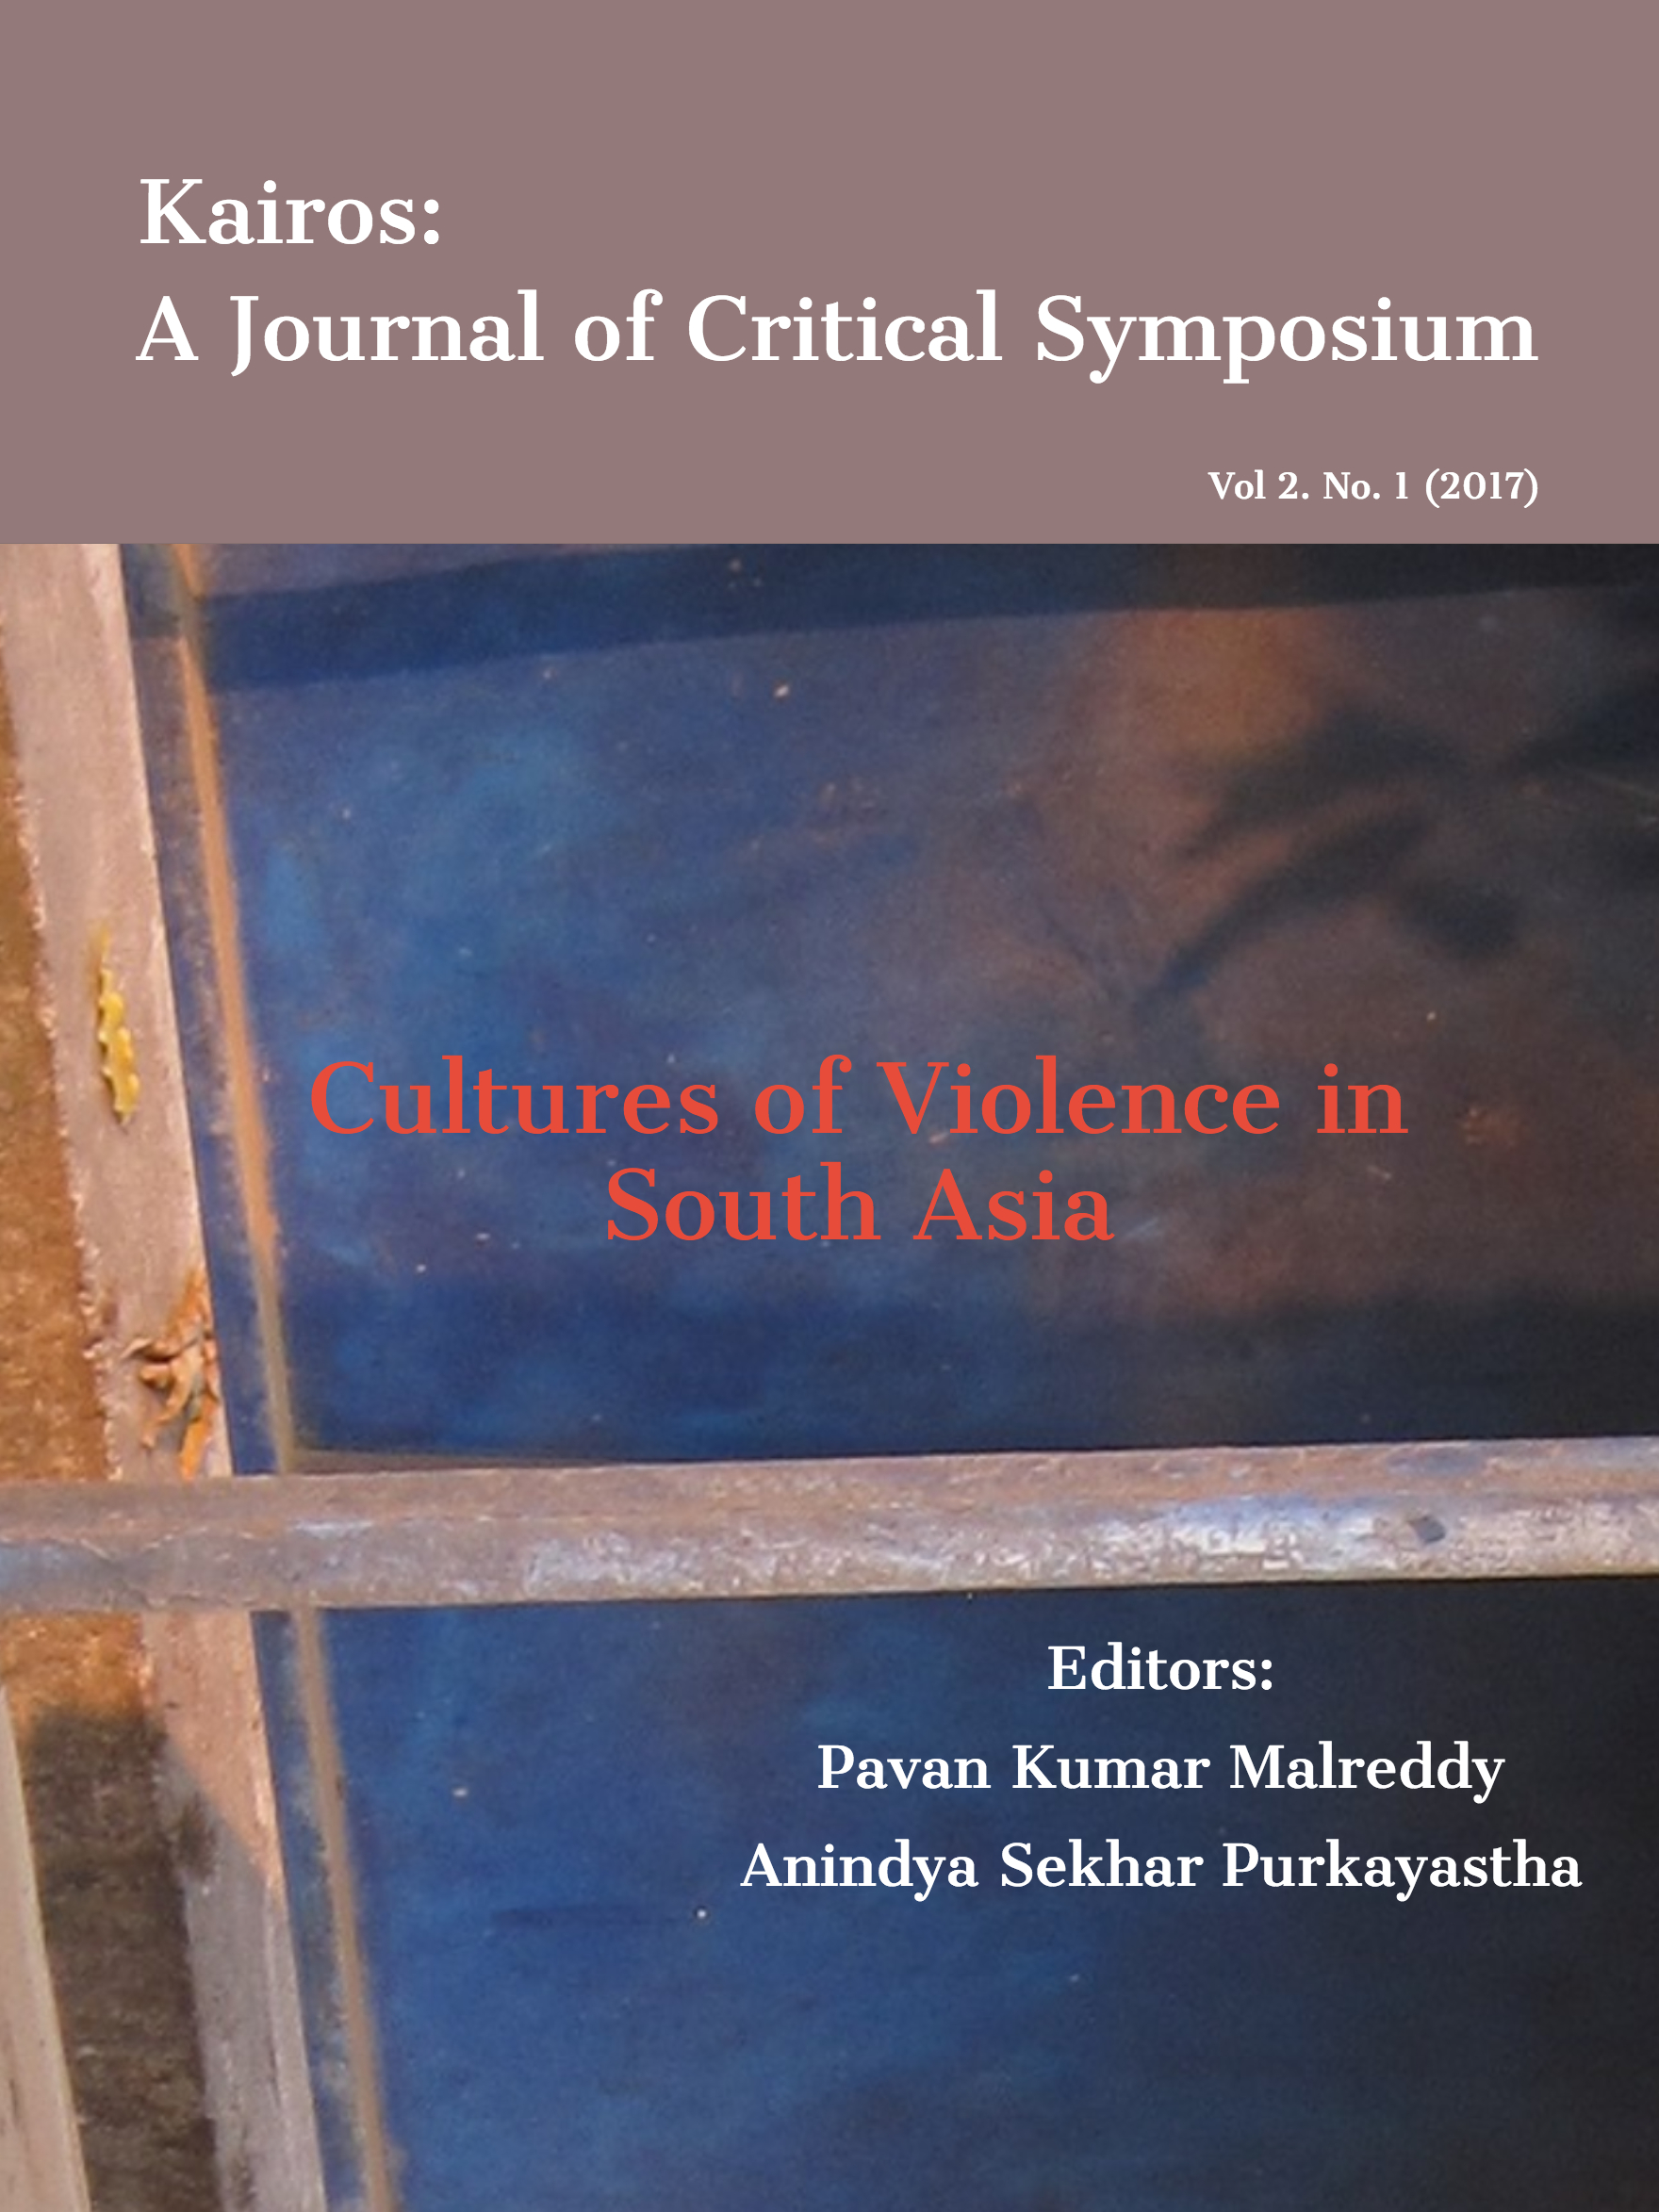 Cultures of Violence in South Asia. Kaiors, Special Issue Vol 2 No 1 (2017)